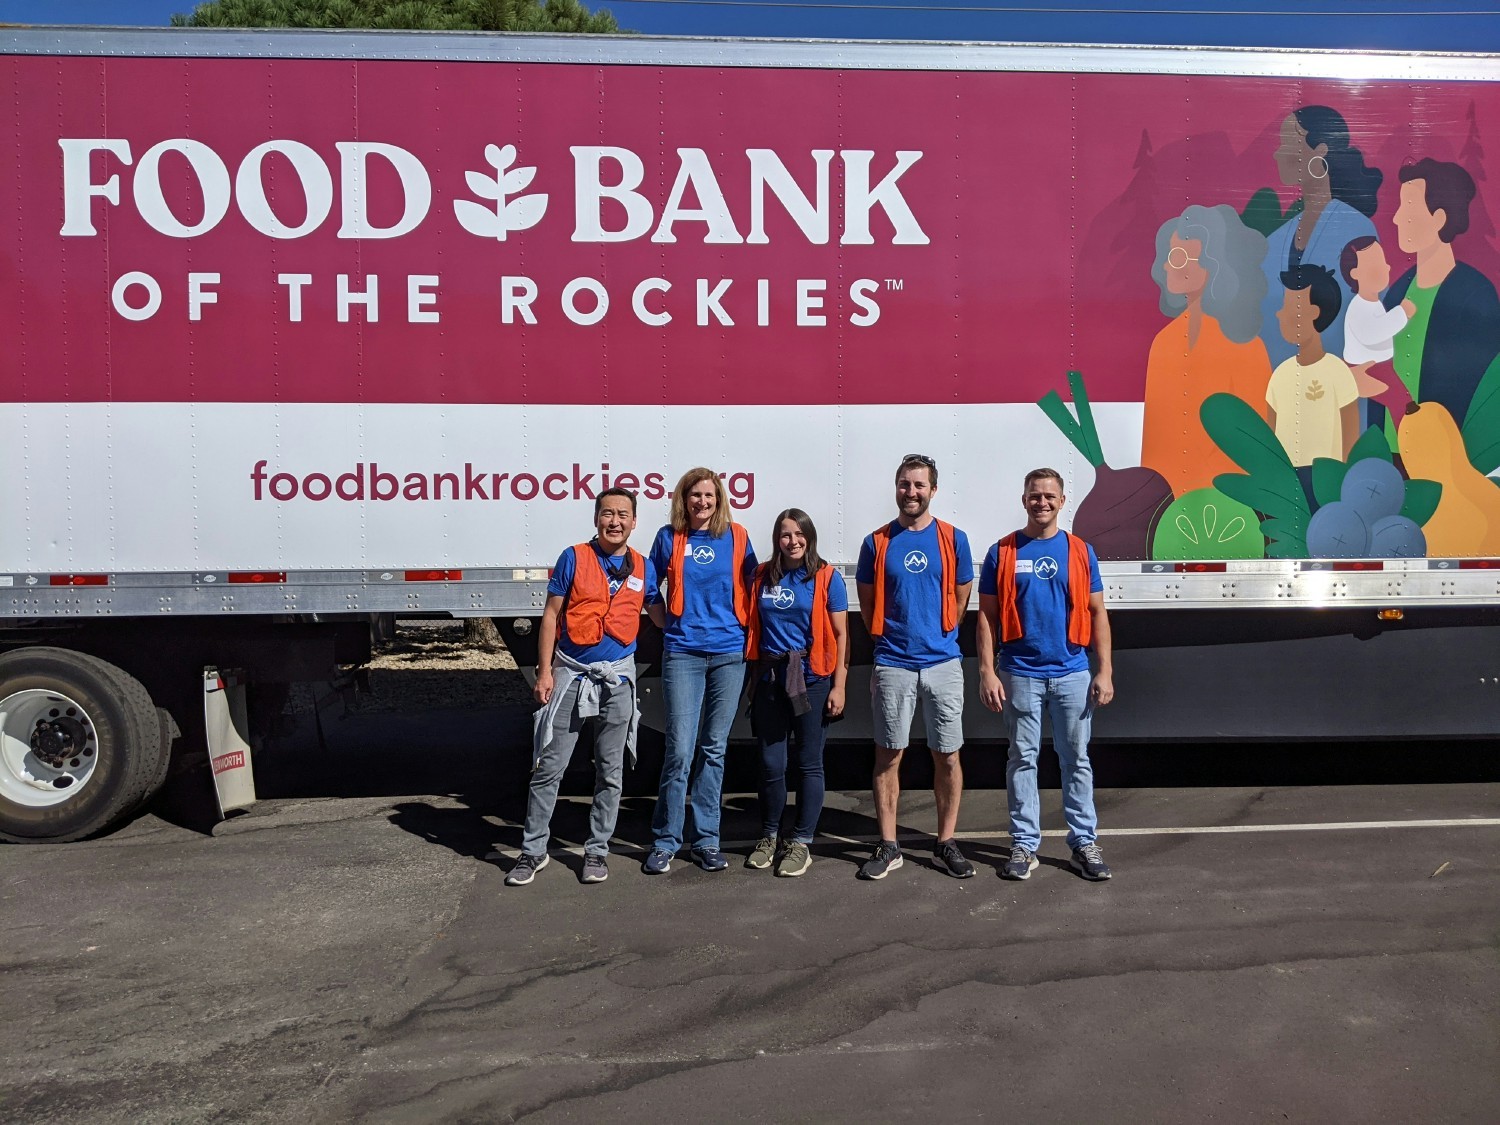 Team members located around Boulder, CO gathered to help the local Food Bank for an annual 